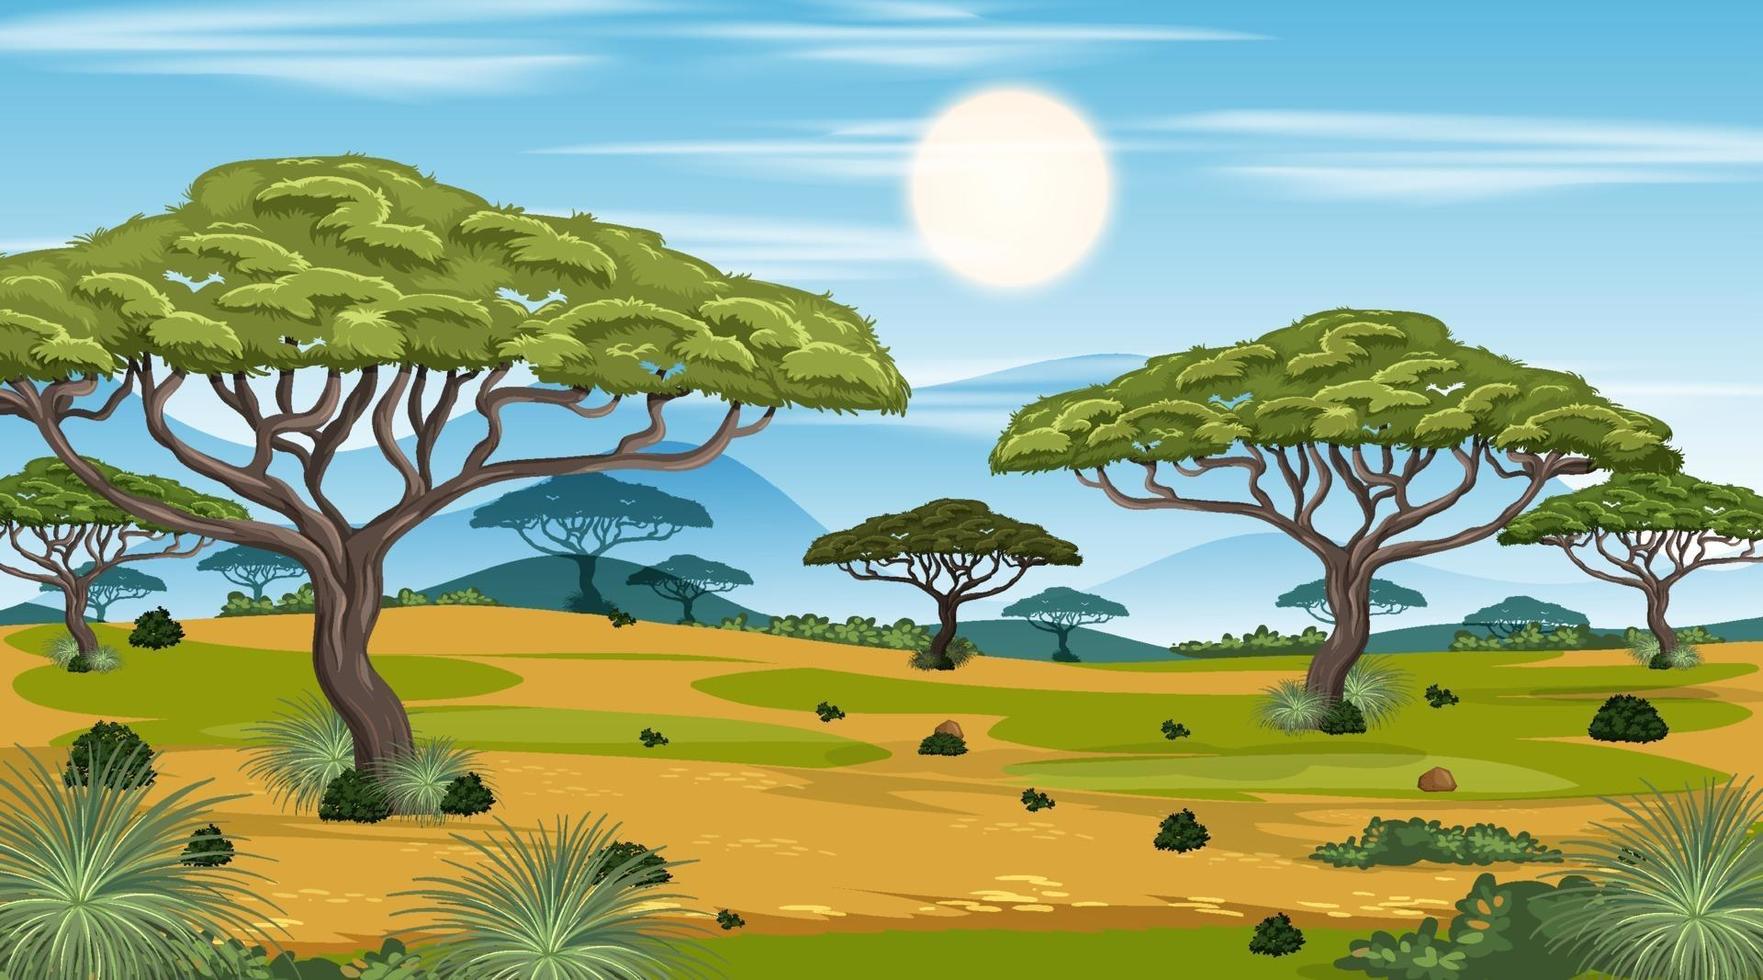 African Savanna forest landscape scene at day time vector